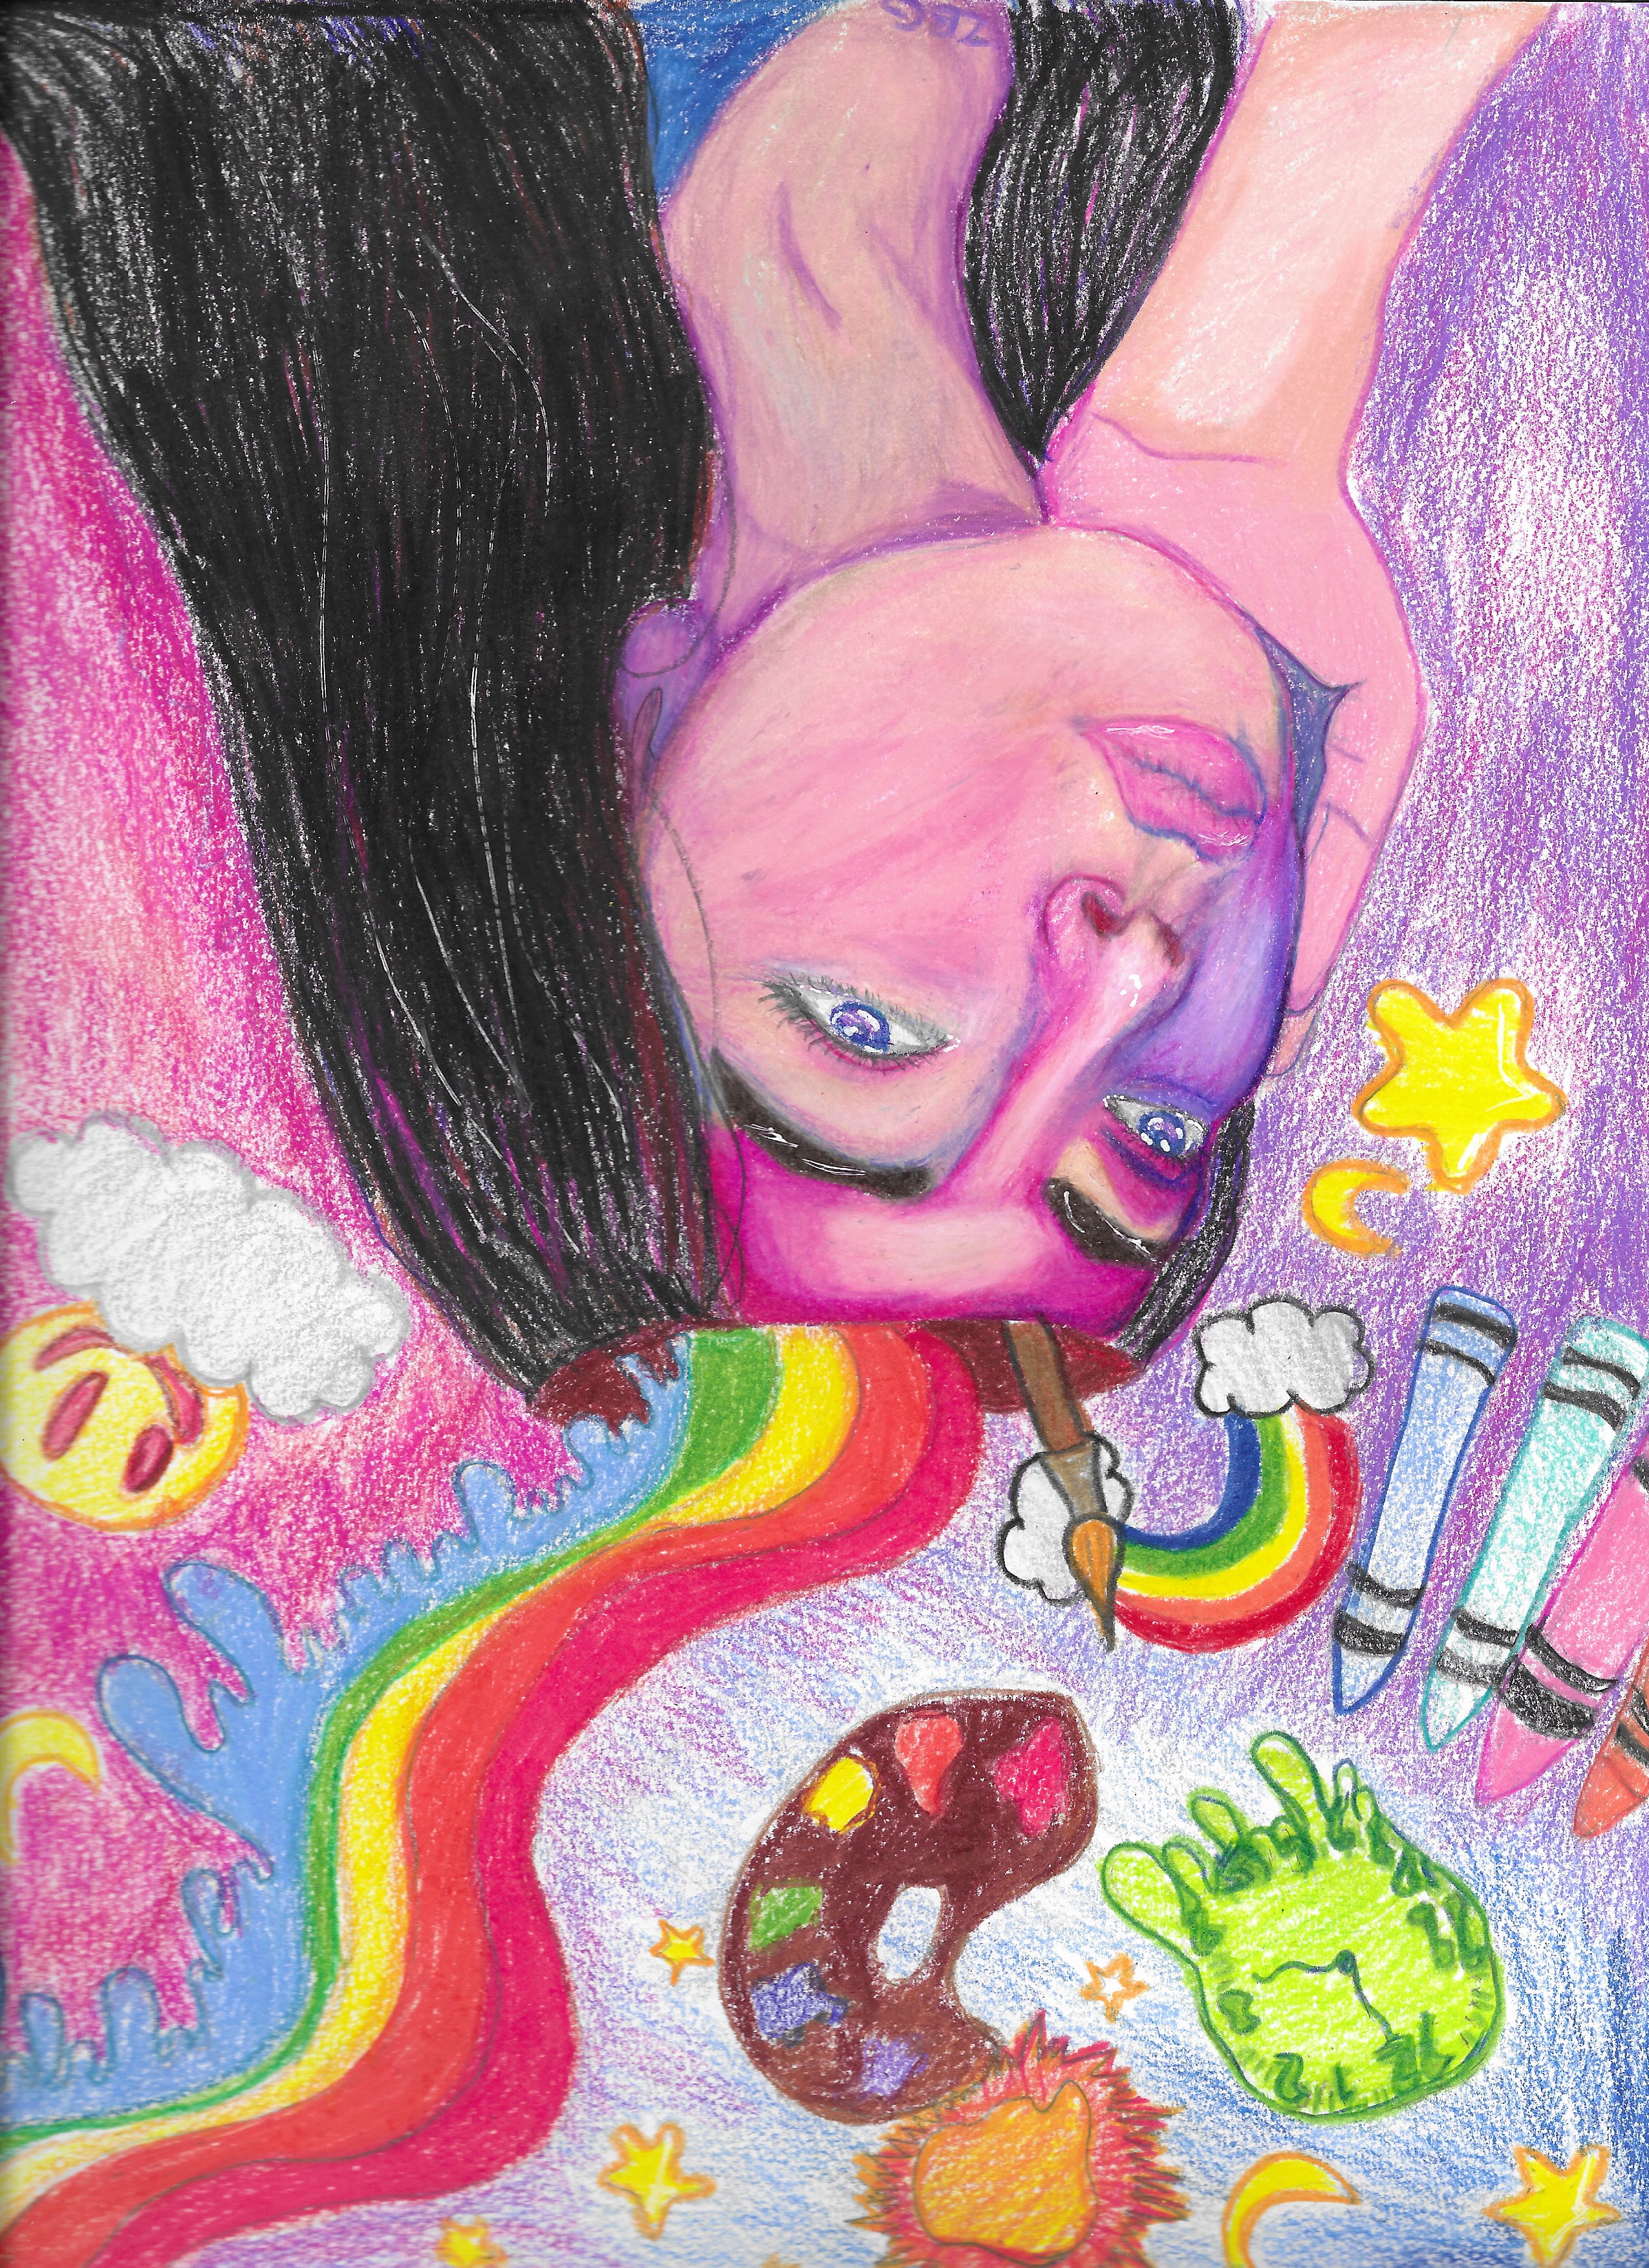 A Colorful Mind - By Zoey G. - A colorful drawing of a person thinking, whose head is surrounded by various art supplies.